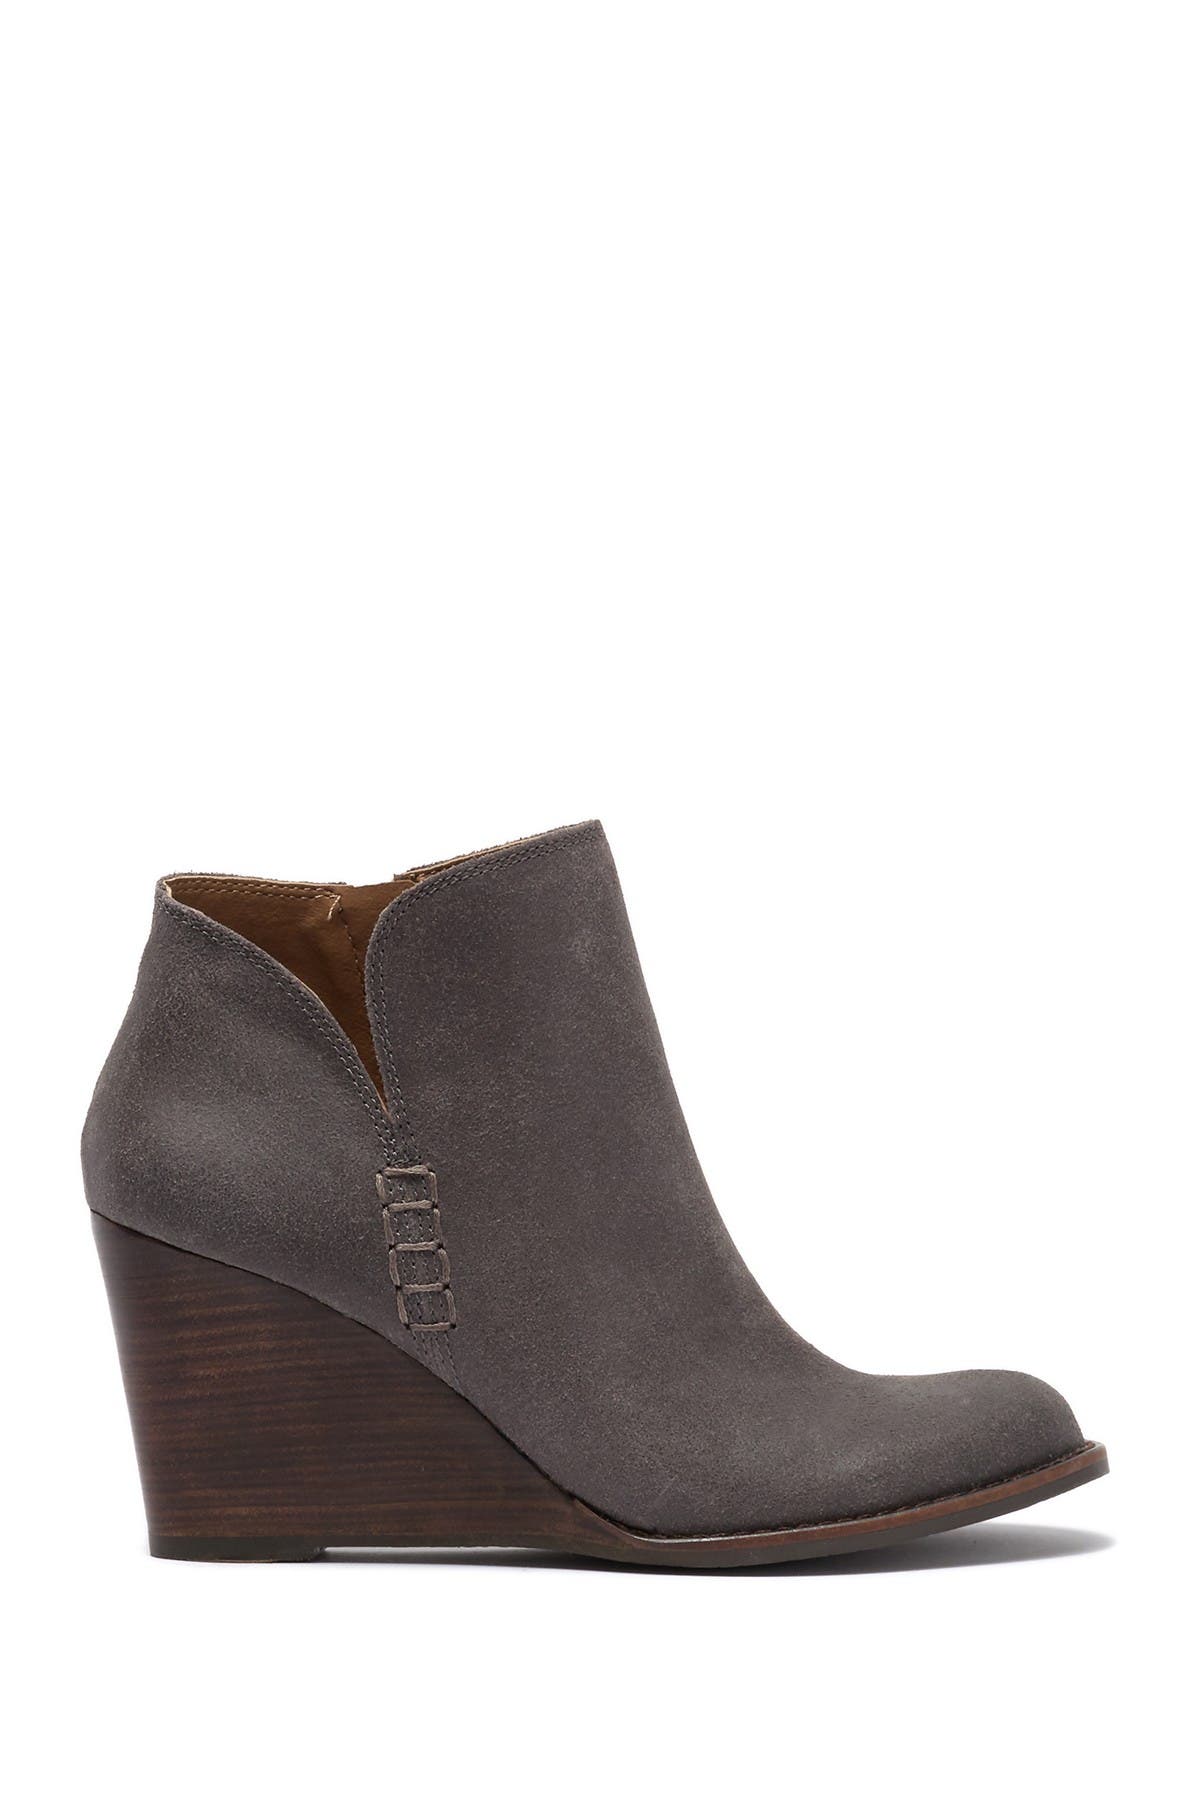 lucky brand yimmie oiled suede wedge booties